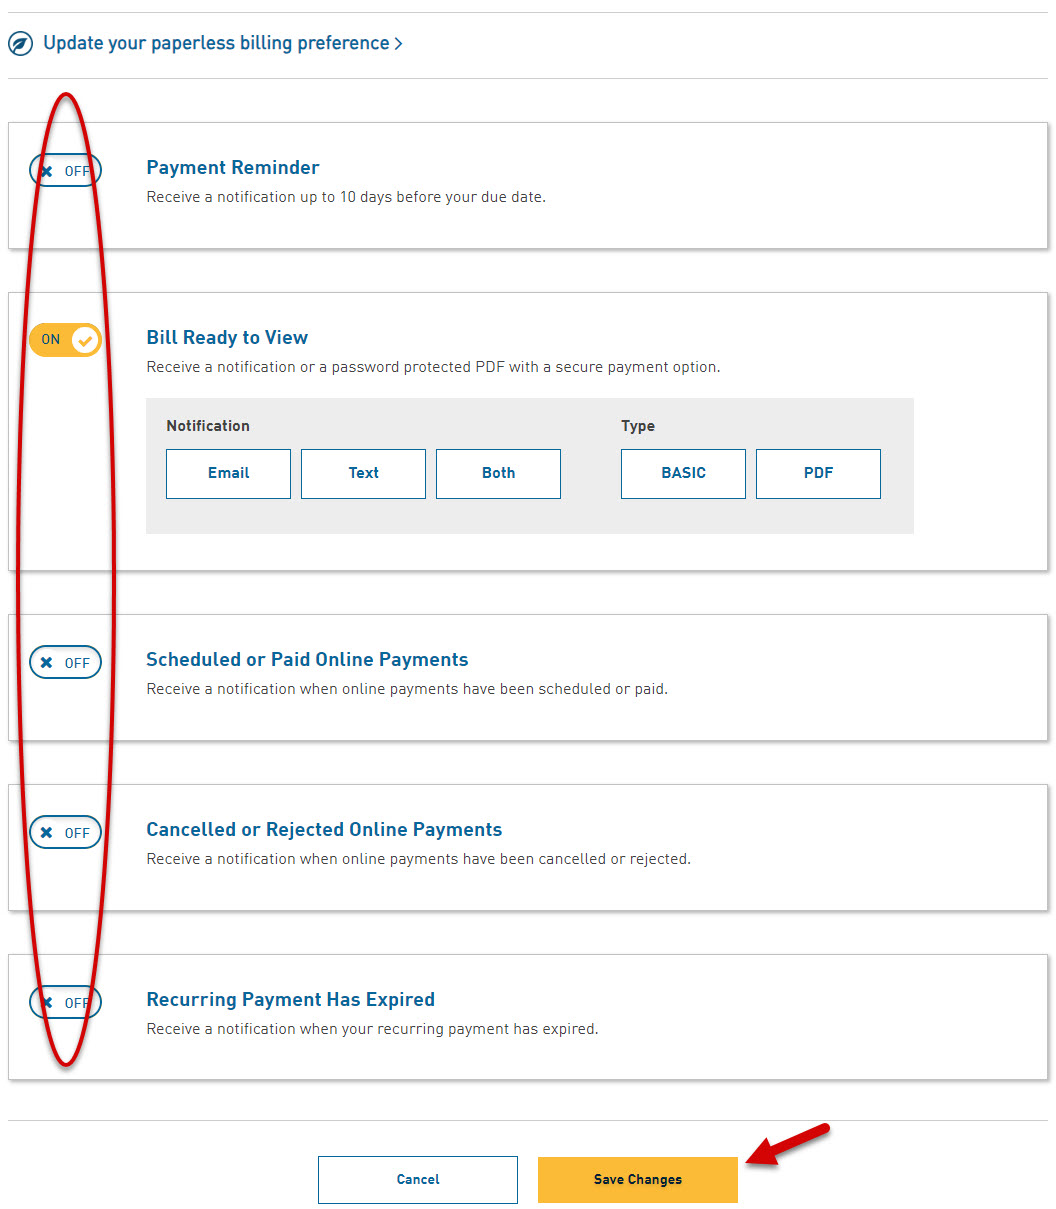 Billing and payment alert options with arrow pointing to save changes